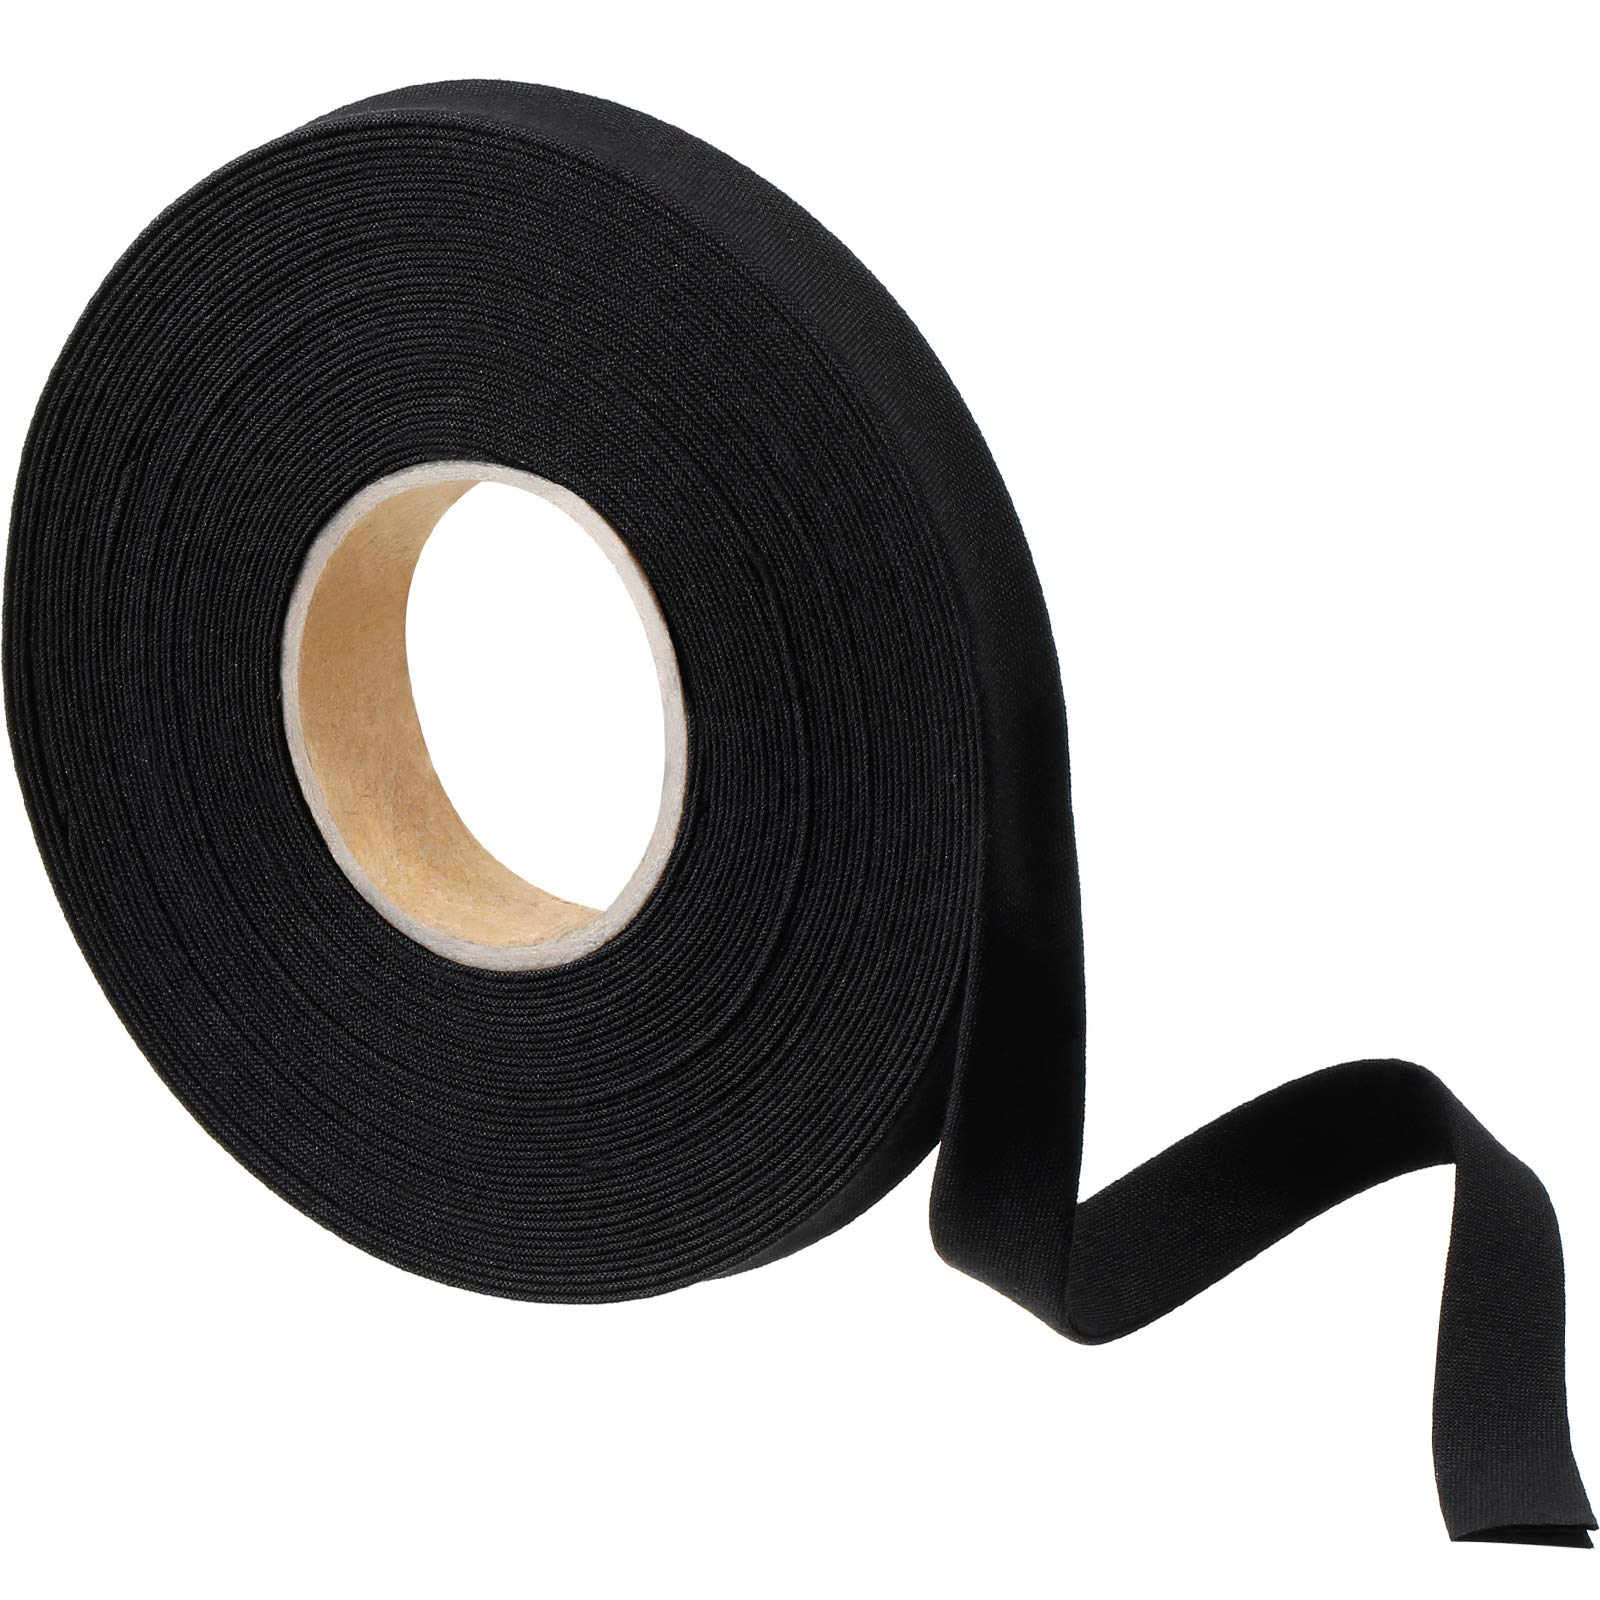 Bias Tape, Double Fold Bias Tape 1/2 Inch Continuous Bulk Bias Tape for  Sewing, Quilting, Binding, Hemming, Apparel Craft, Polyester